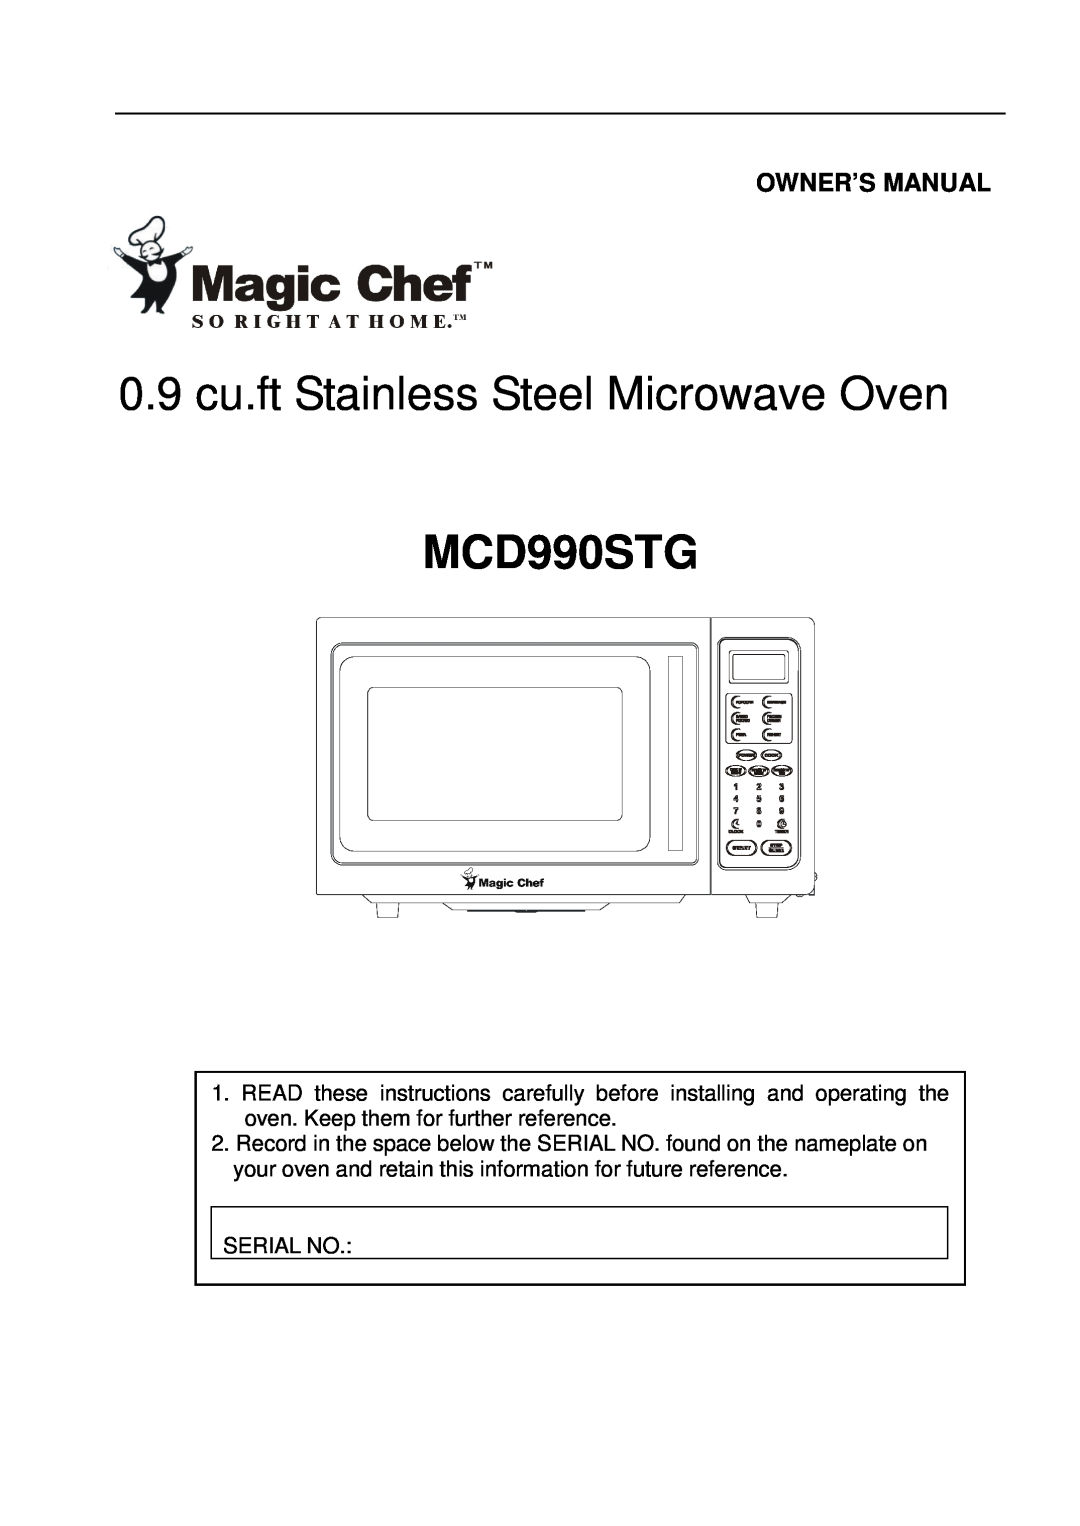 Magic Chef MCD990STG owner manual 0.9 cu.ft Stainless Steel Microwave Oven 